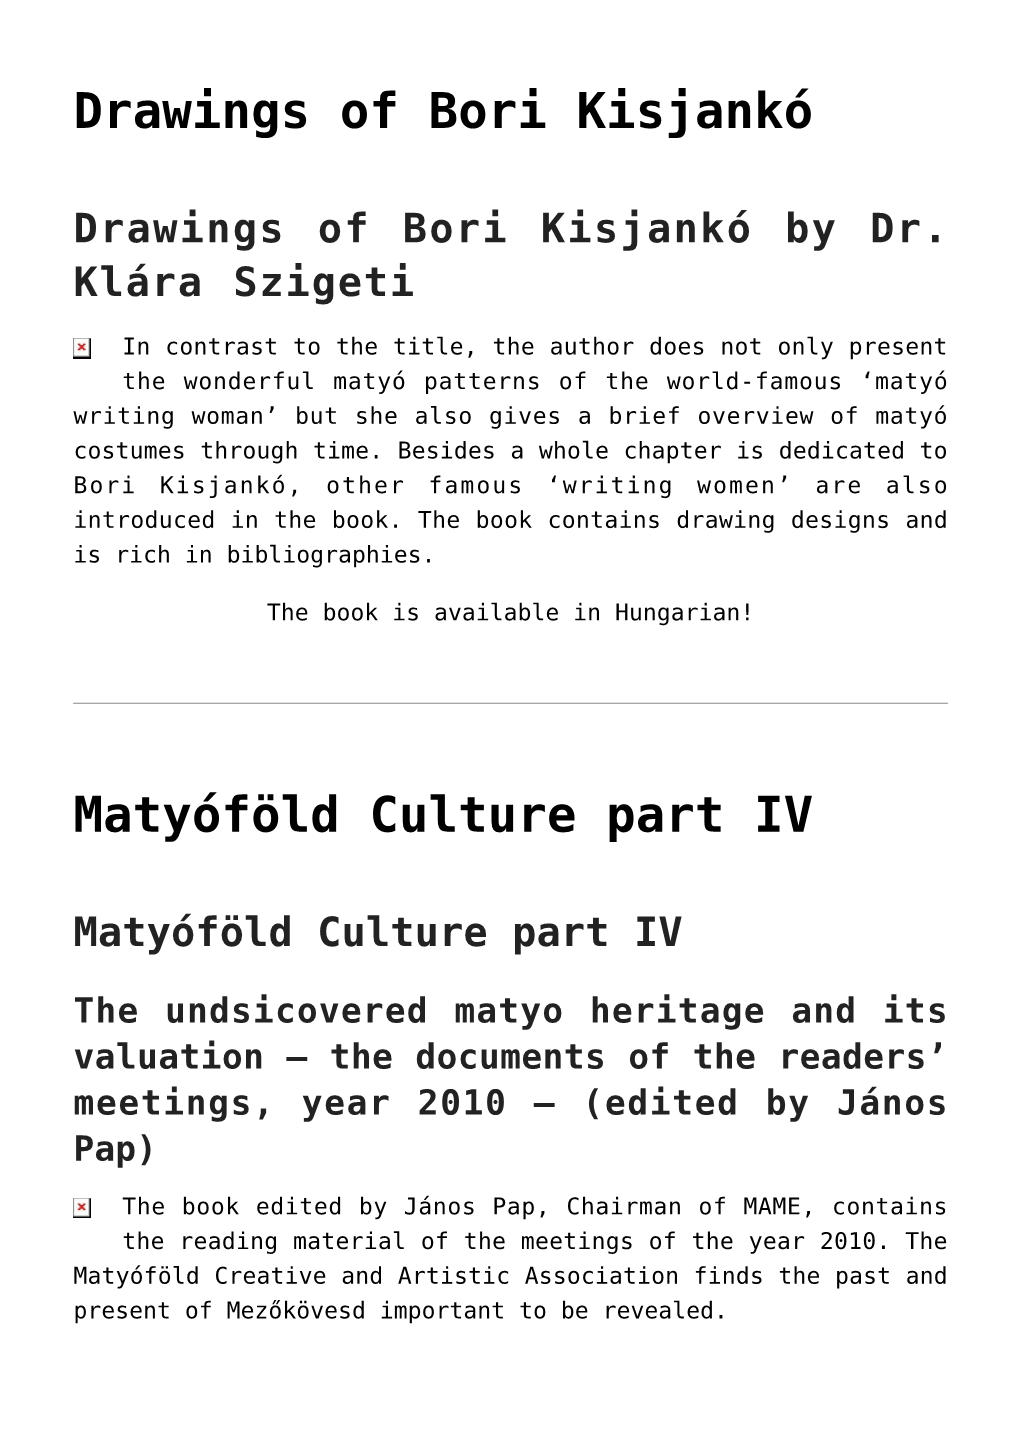 Part III.,On the Culture of Matyóland